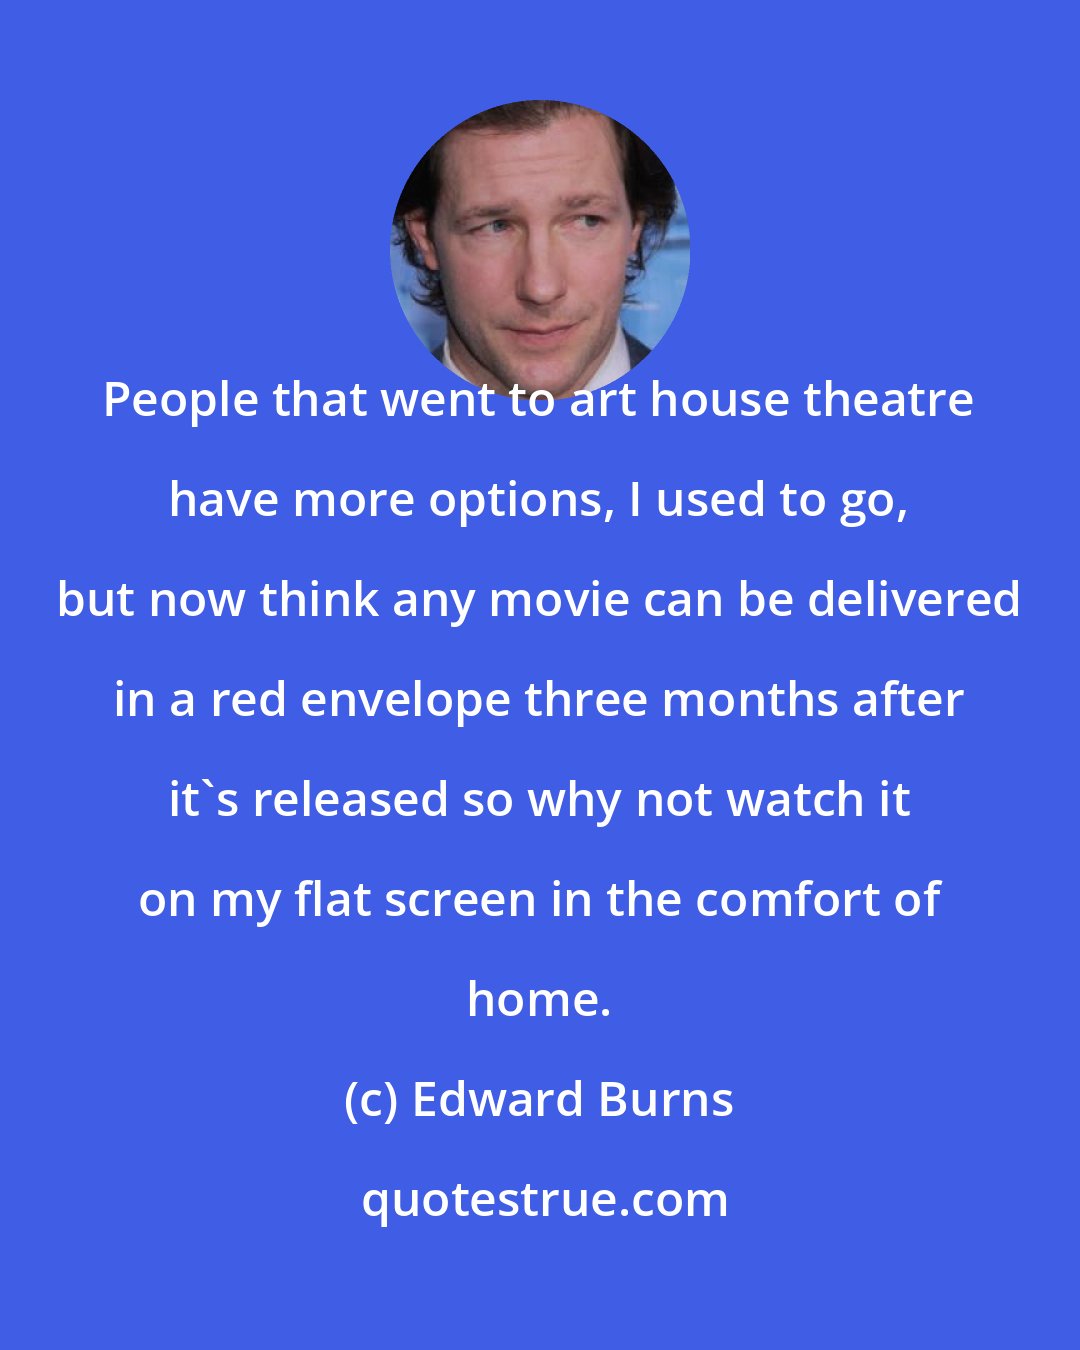 Edward Burns: People that went to art house theatre have more options, I used to go, but now think any movie can be delivered in a red envelope three months after it's released so why not watch it on my flat screen in the comfort of home.